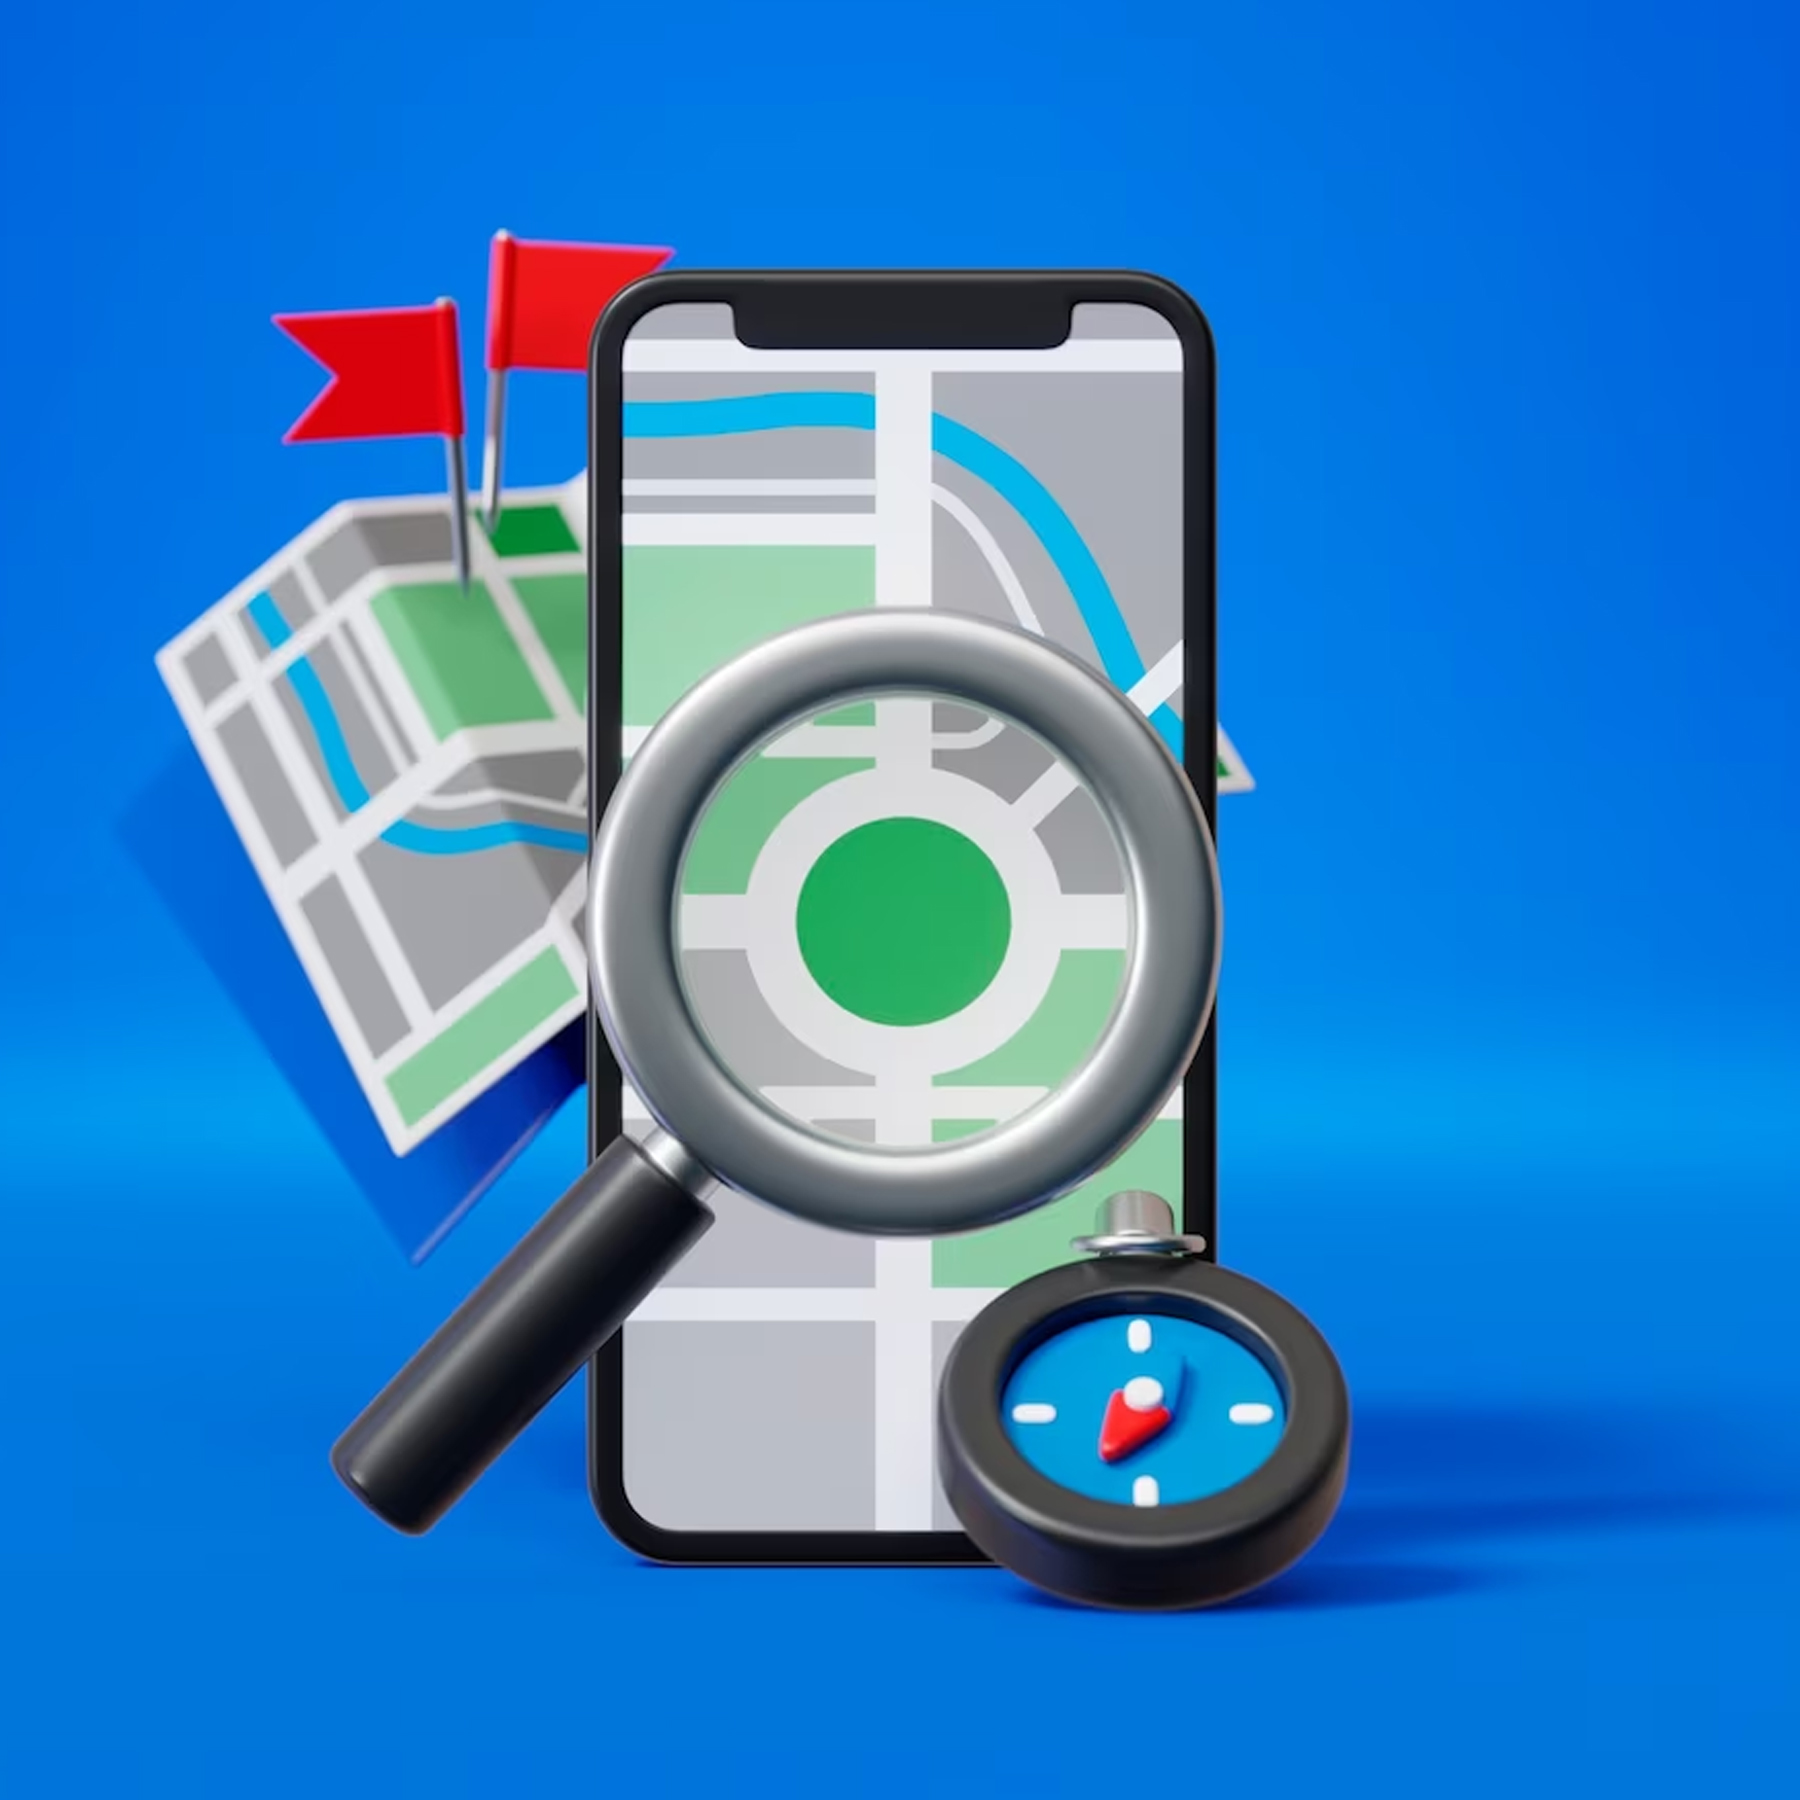 Why-Local-SEO-Is-Crucial-for-Your-Business-local-seo-services-london-uk-webvizion